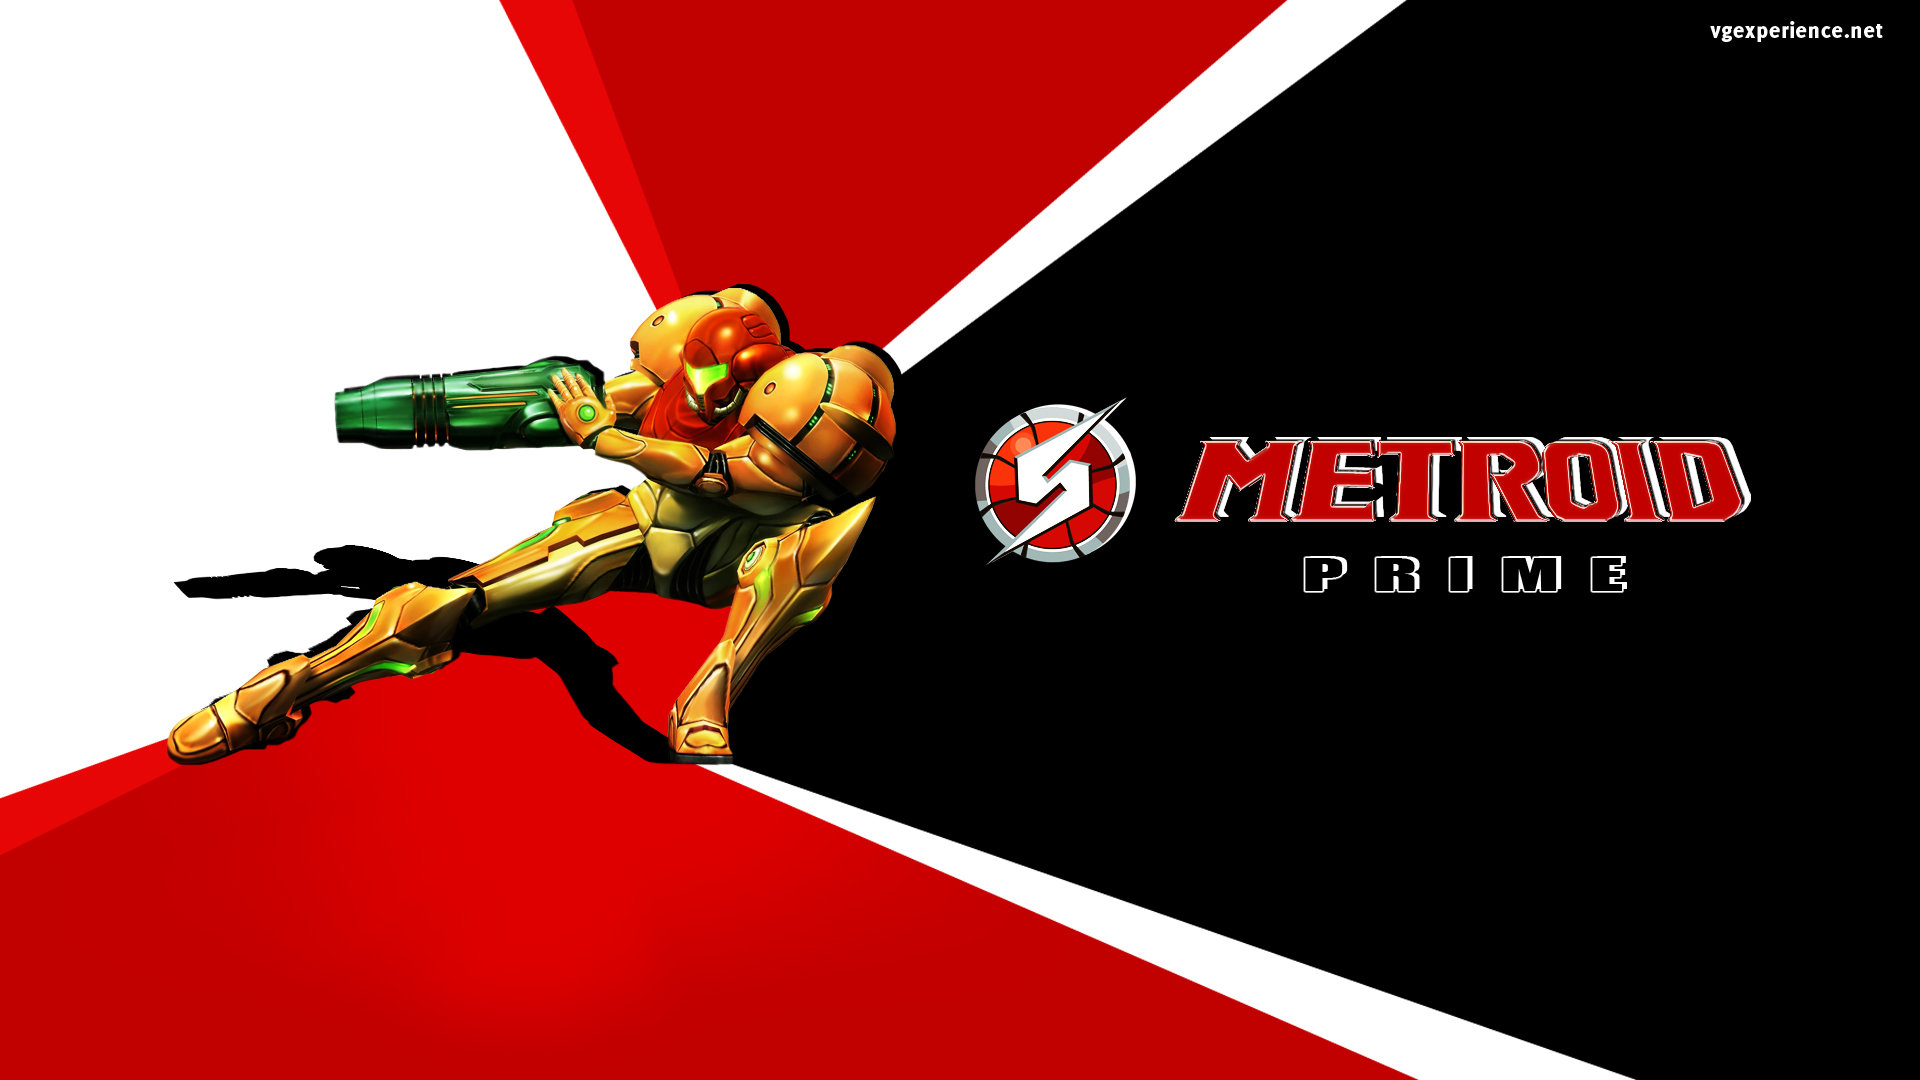 Download 1080p Metroid Prime PC background ID:300384 for free